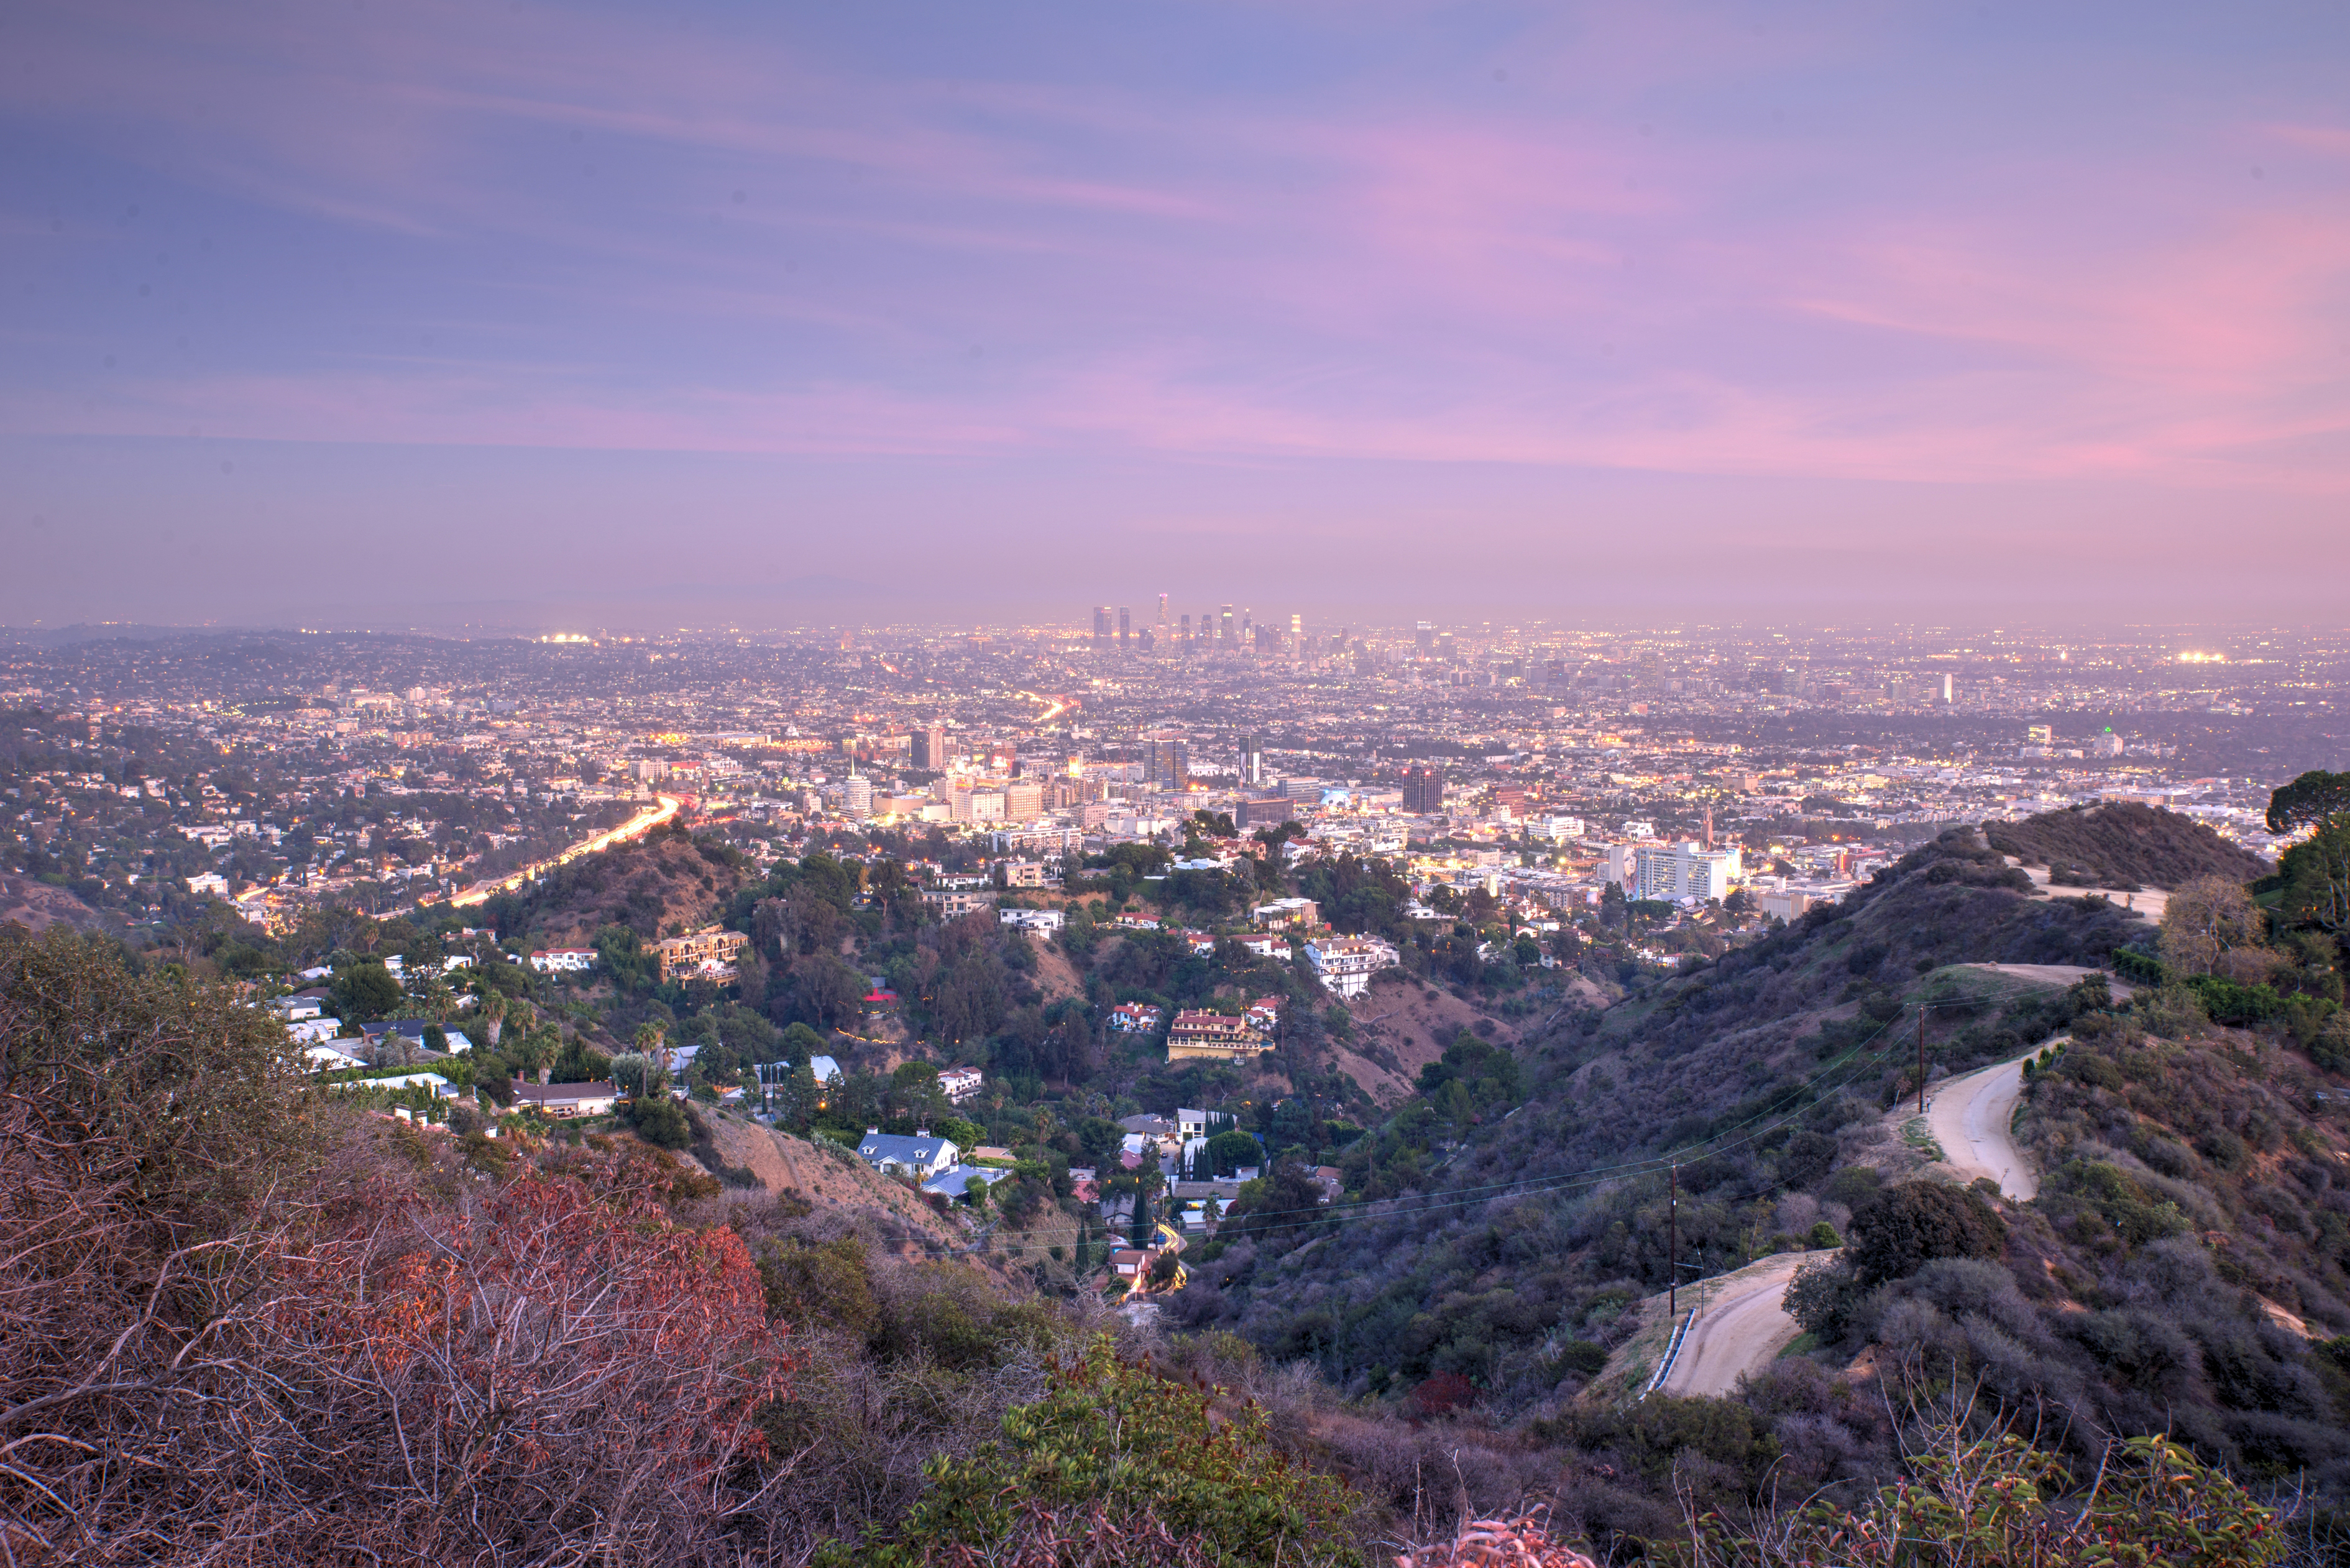 Aerial view of Los angeles city from Runyon Canyon park